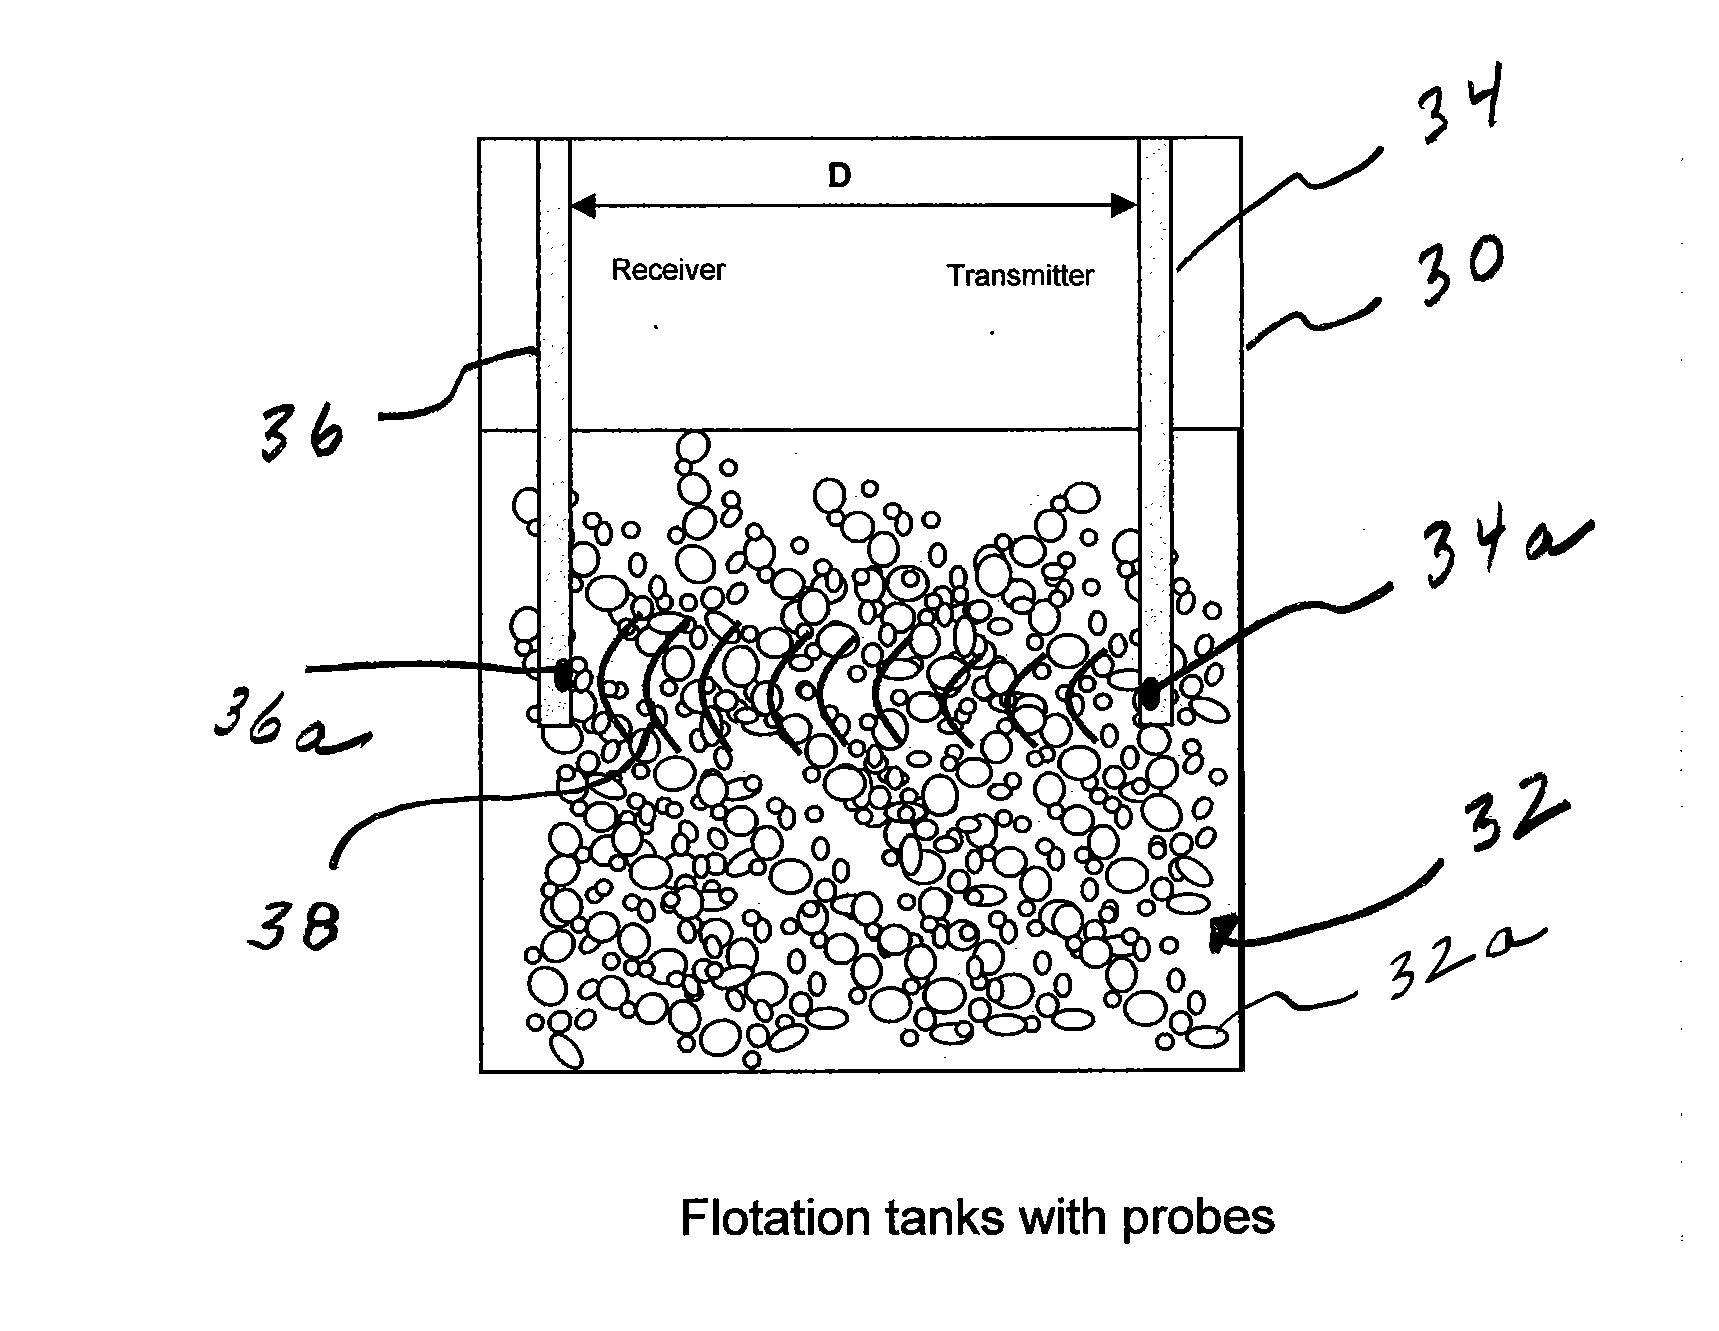 Method and apparatus for determining gvf (gas volume fraction) for aerated fluids and liquids in flotation tanks, columns, drums, tubes, vats